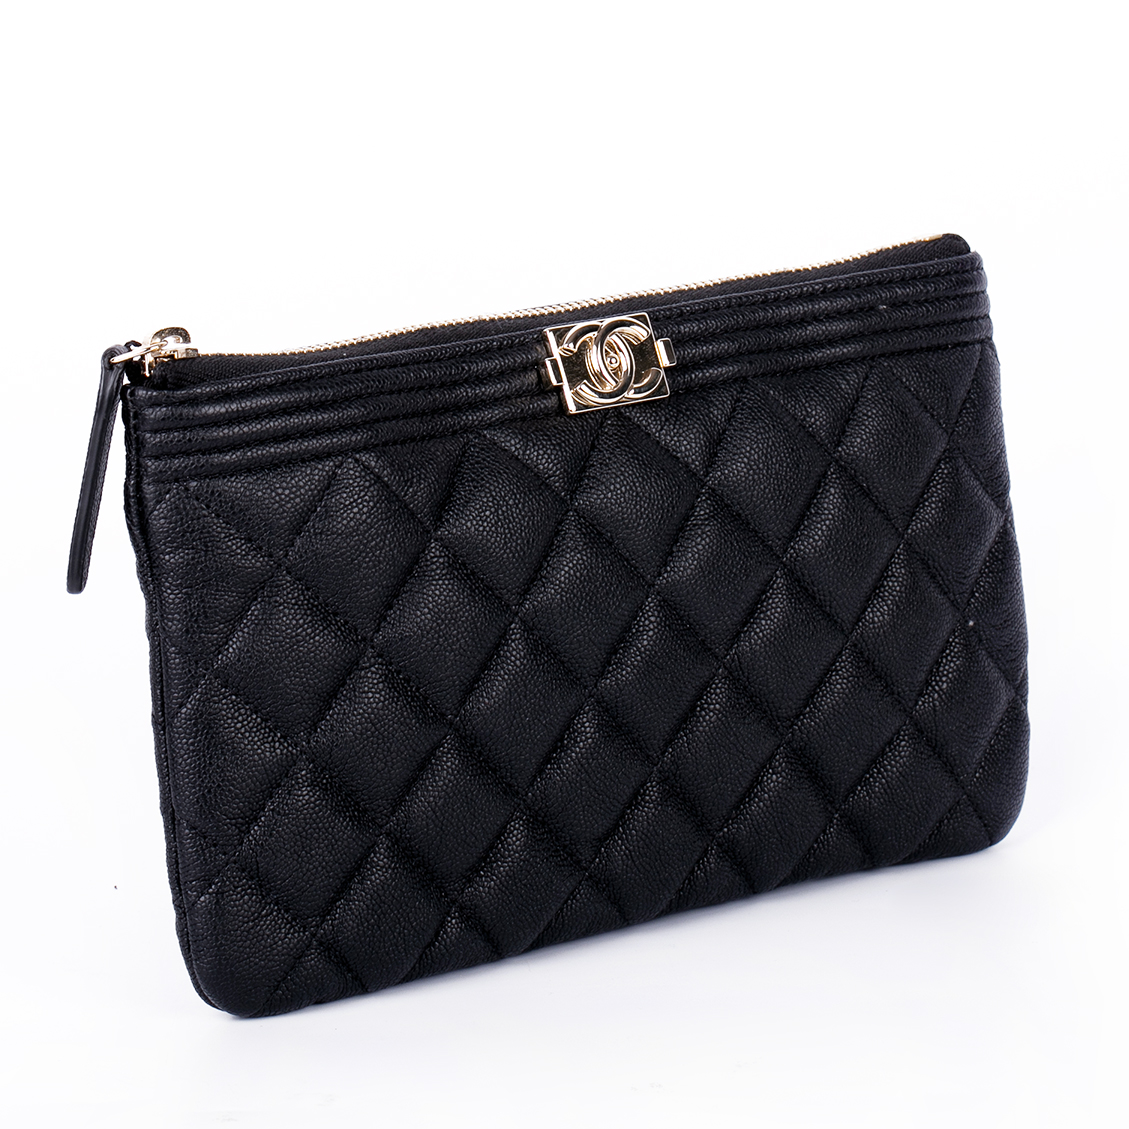 Chanel Black Quilted Caviar Leather Small Boy Flap Bag  STYLISHTOP